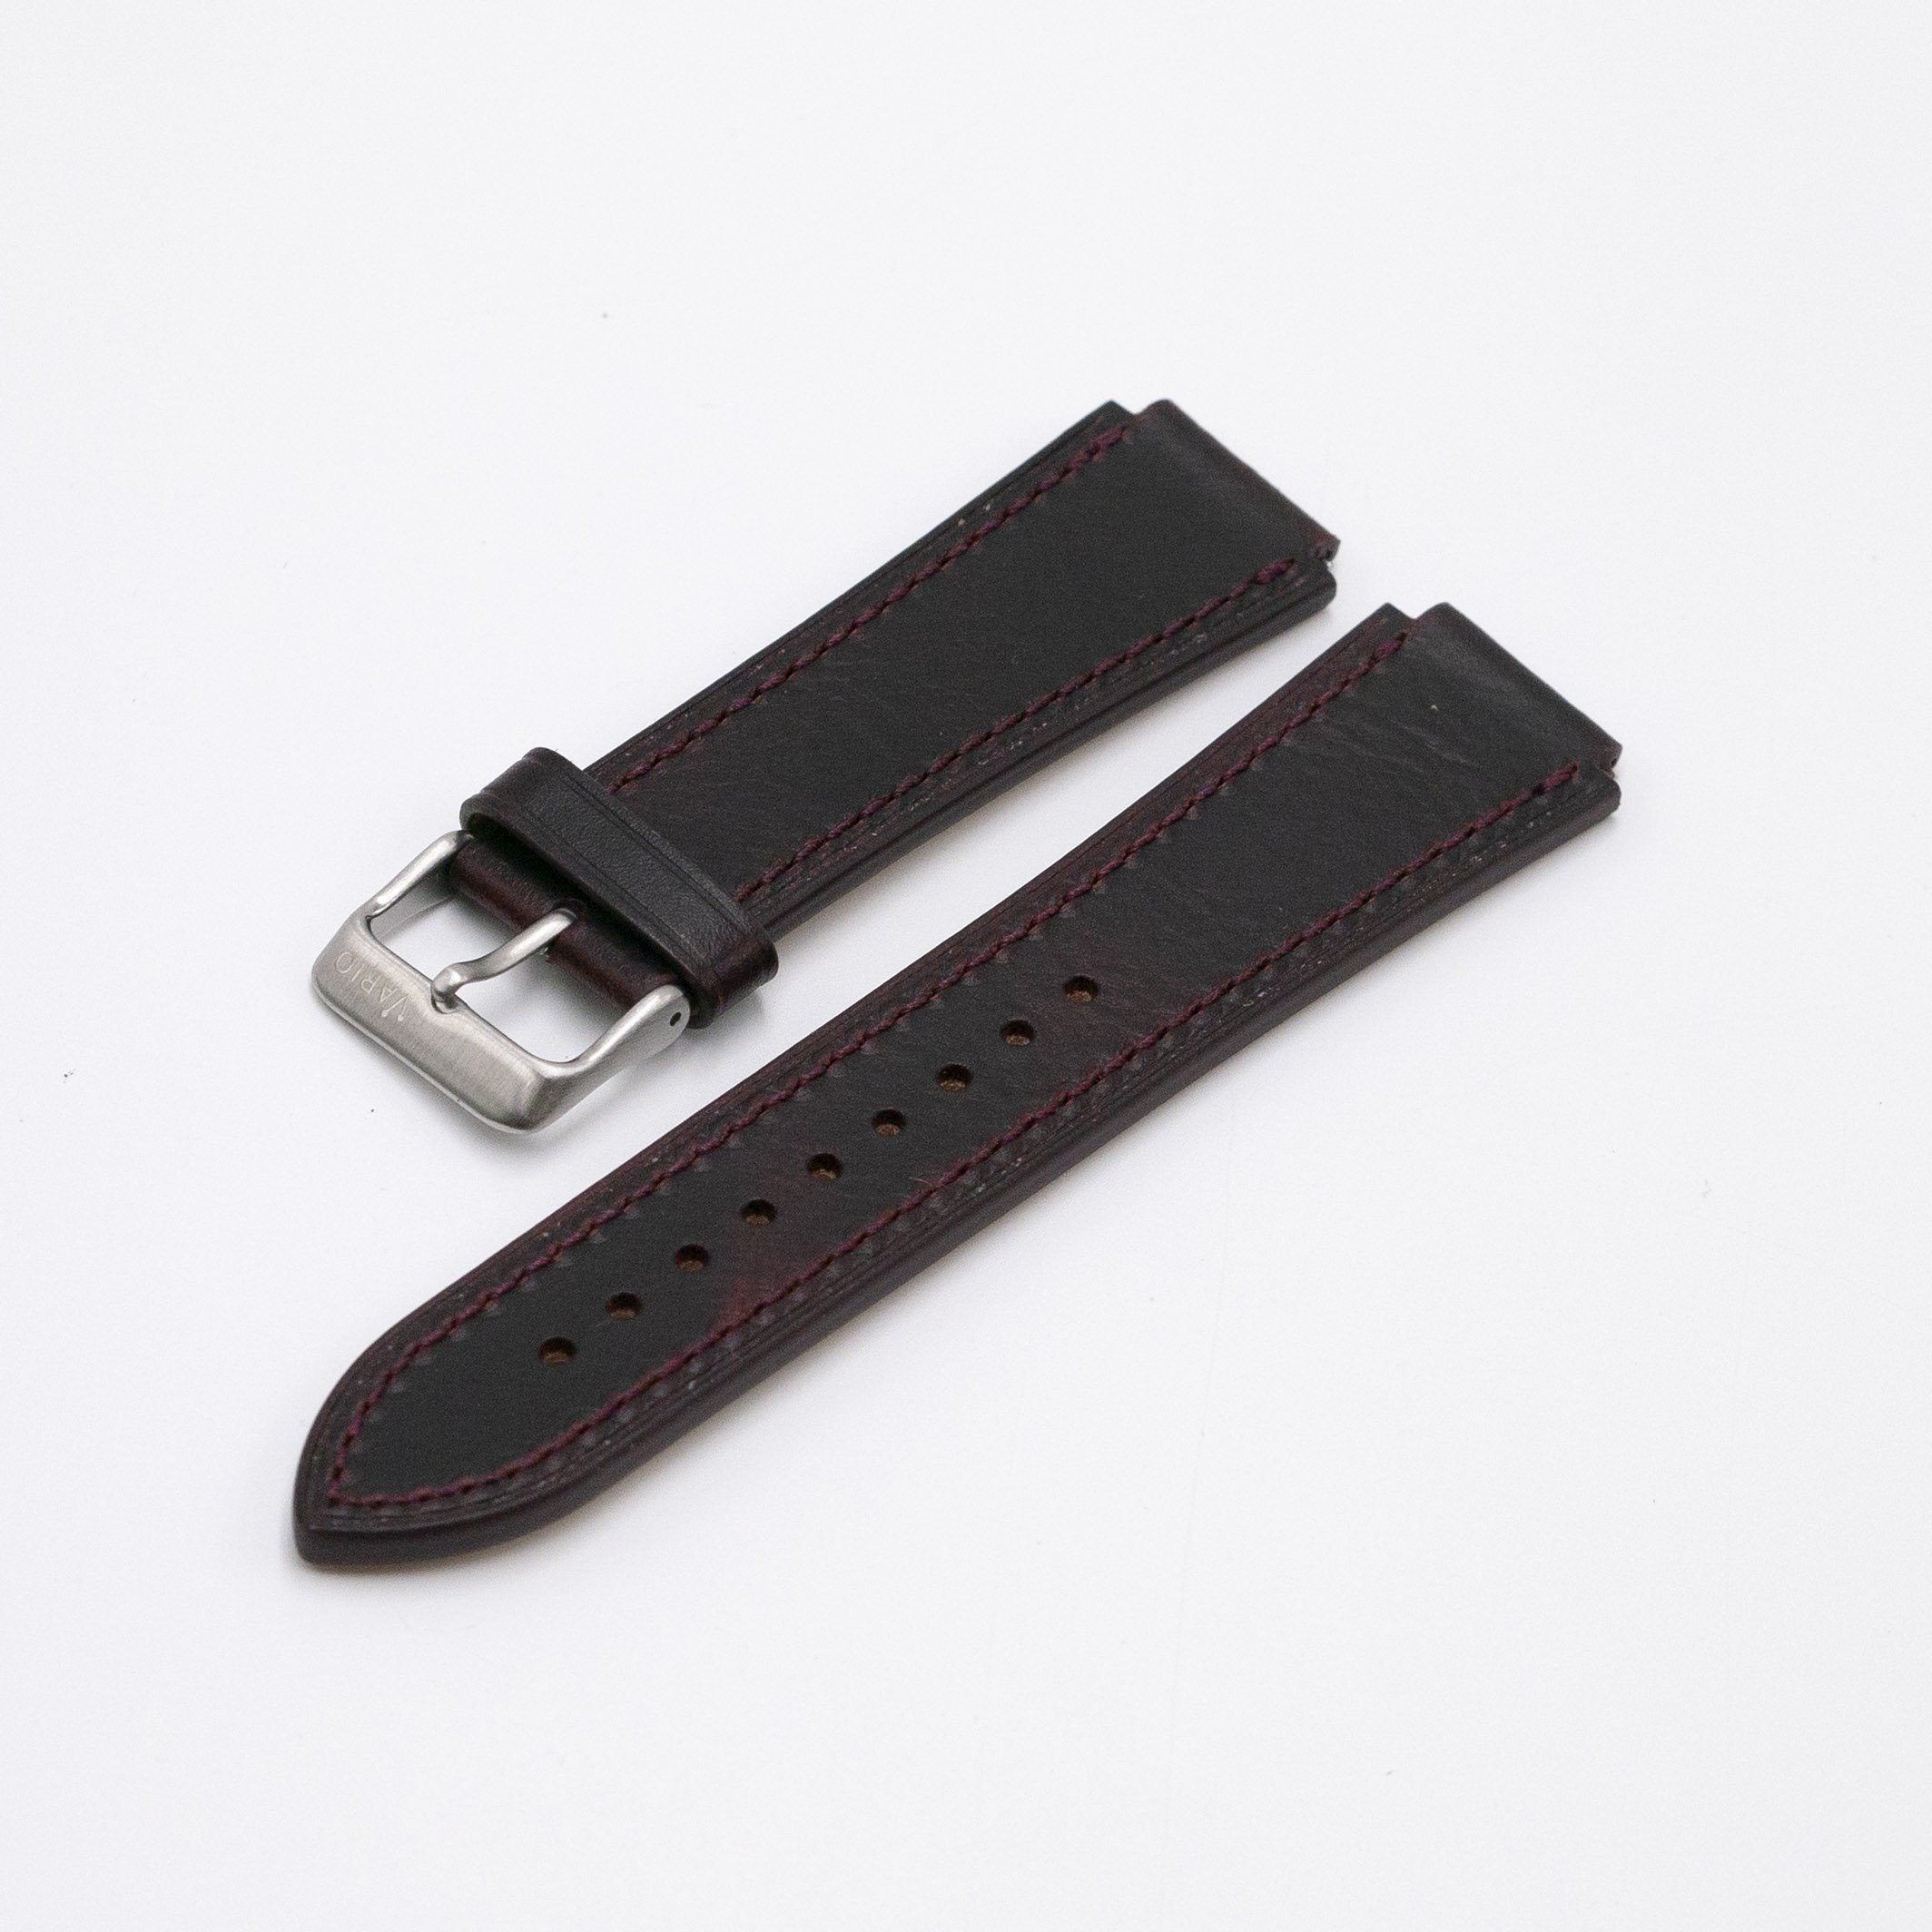 Oiled Leather Merlot Red Watch Strap for Casio AE1200WH World Time Watch